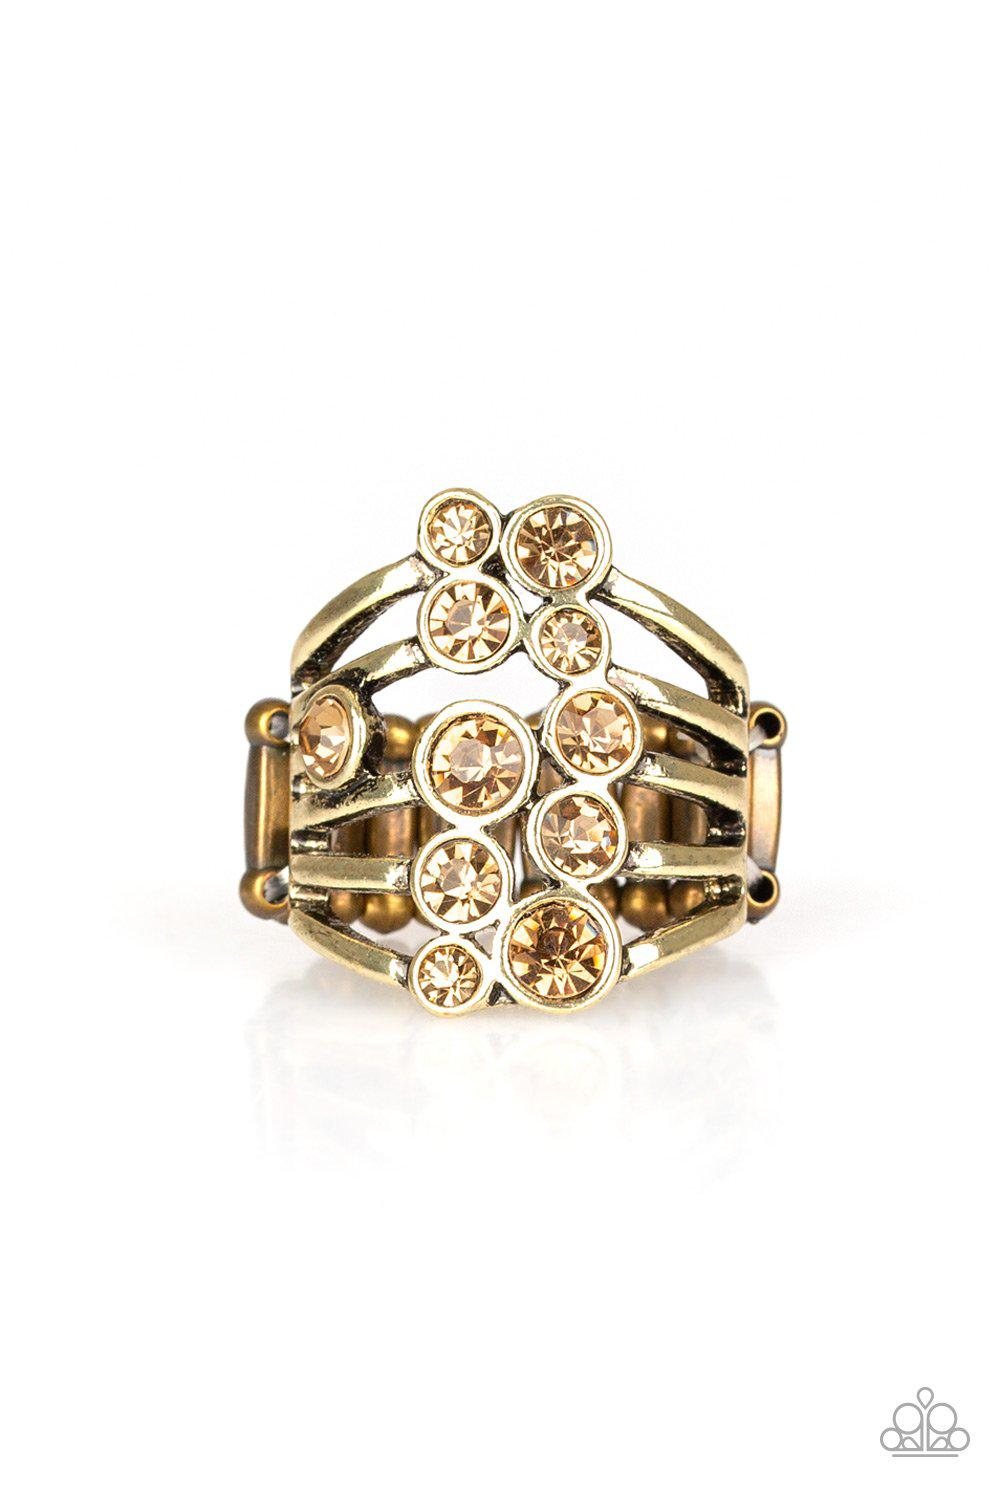 Meet In The Middle Brass and Rhinestone Ring - Paparazzi Accessories-CarasShop.com - $5 Jewelry by Cara Jewels